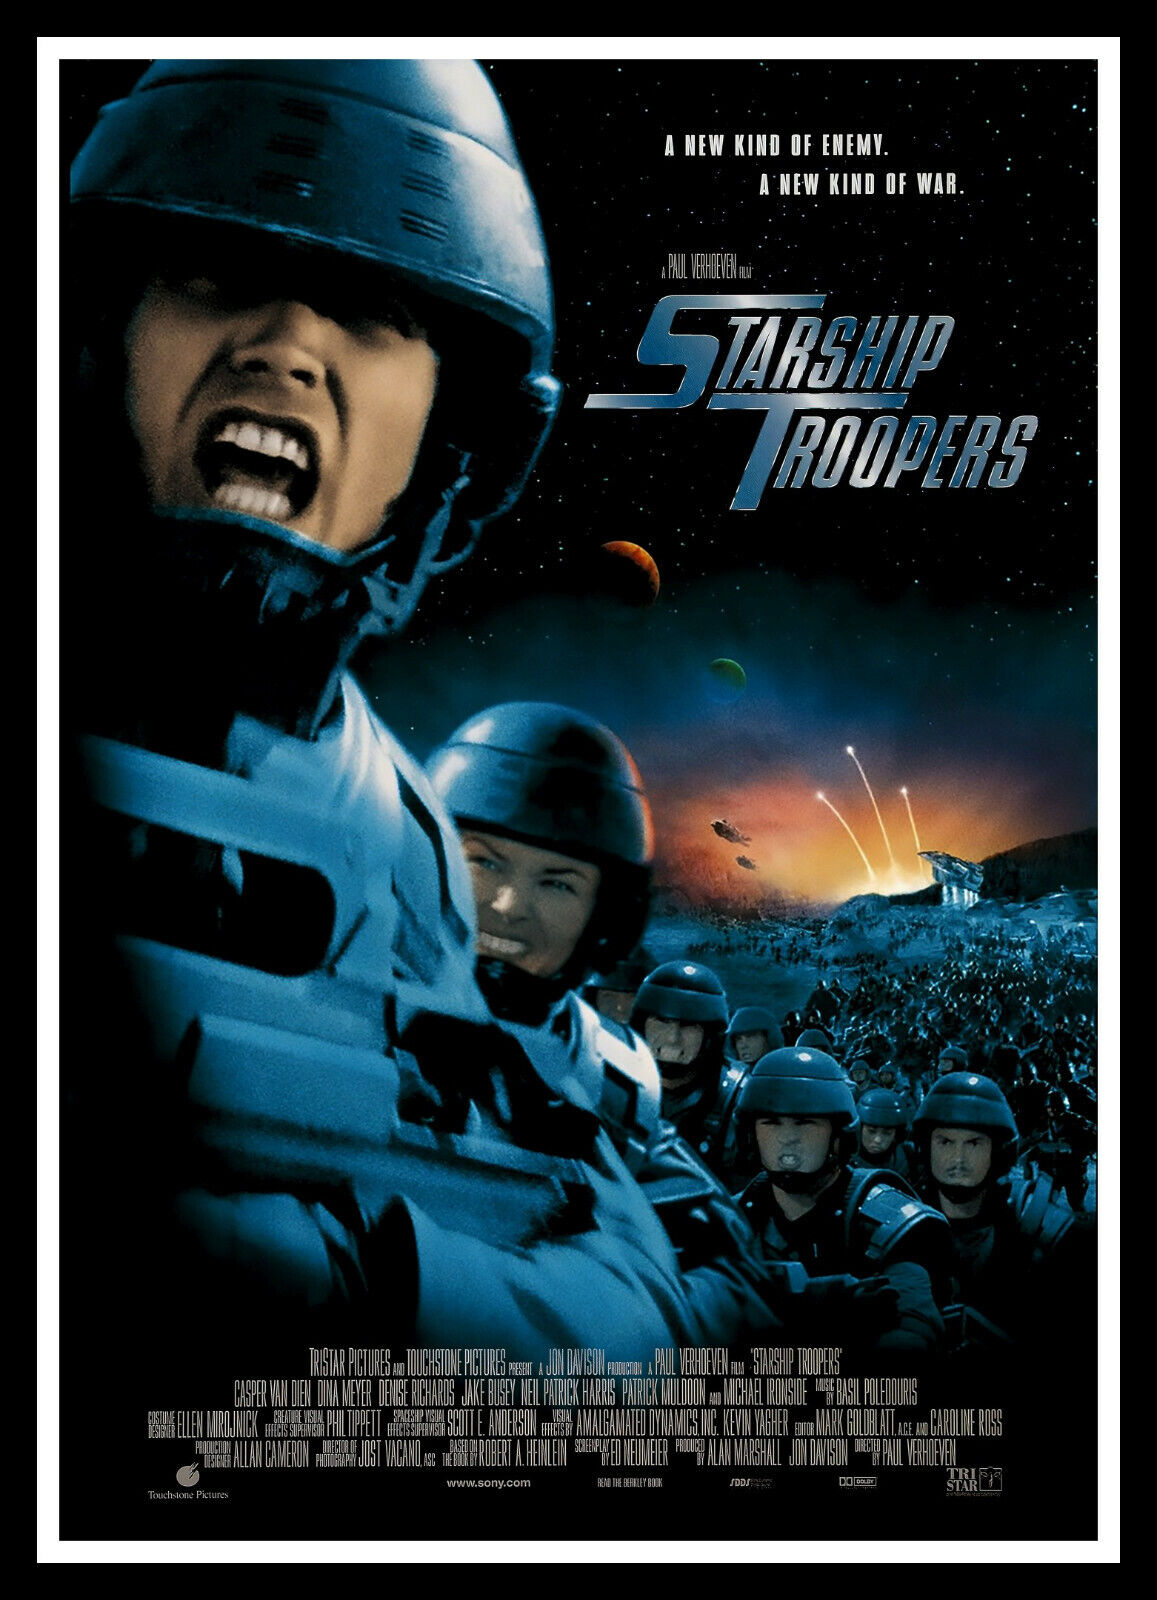 Star Troopers: A Movie Debuted Before its Time